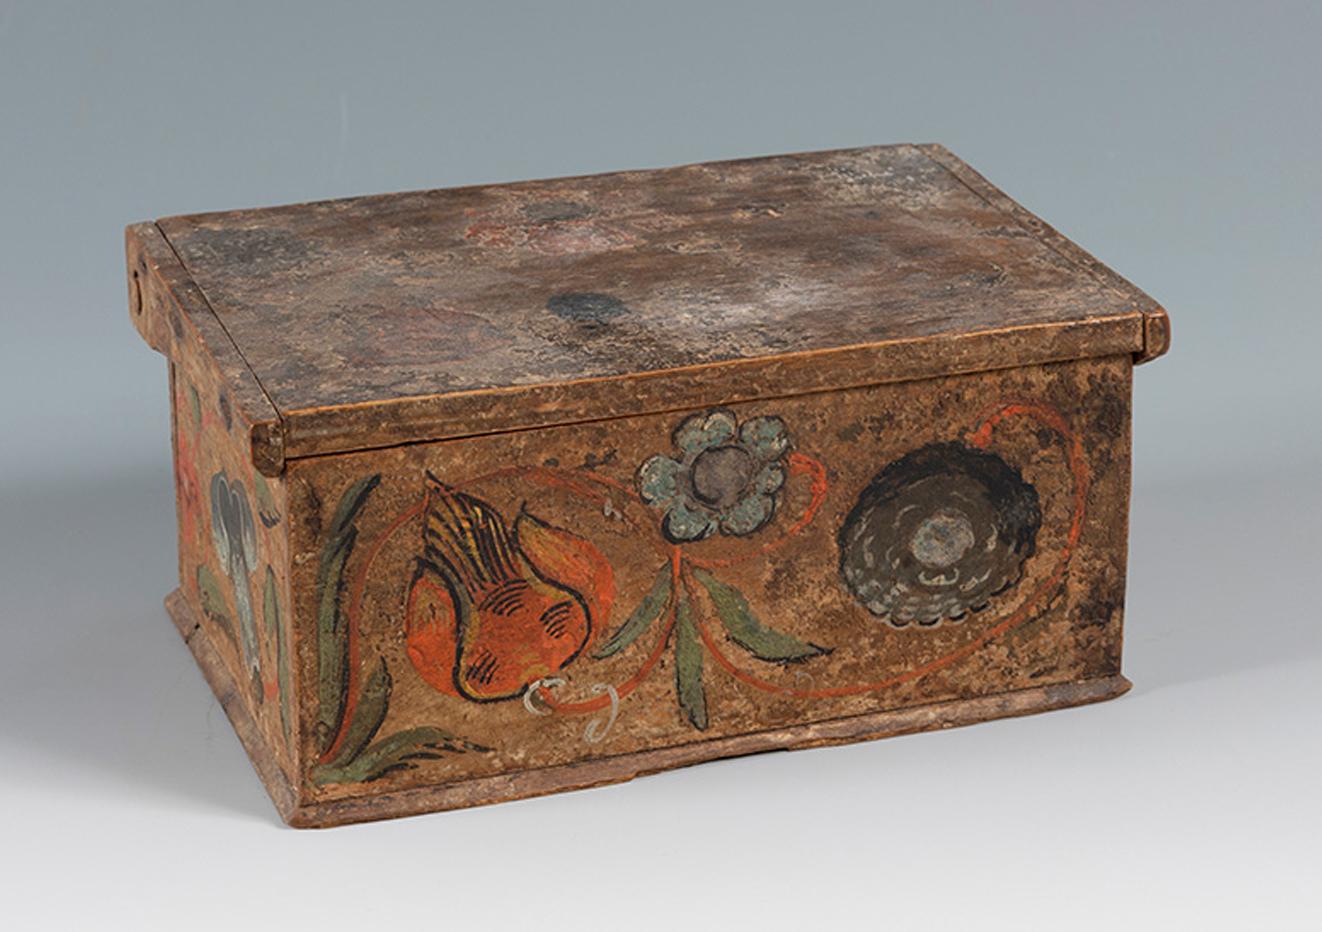 Mexican chest. New Spain, 18th century.
In polychrome wood.
Slight paint losses on the lid.
Measurements: 7 x 16 x 6.5 cm.
Wooden chest from the viceregal period, hand-polychromed on each of its sides with large flowers and juicy fruit. From the